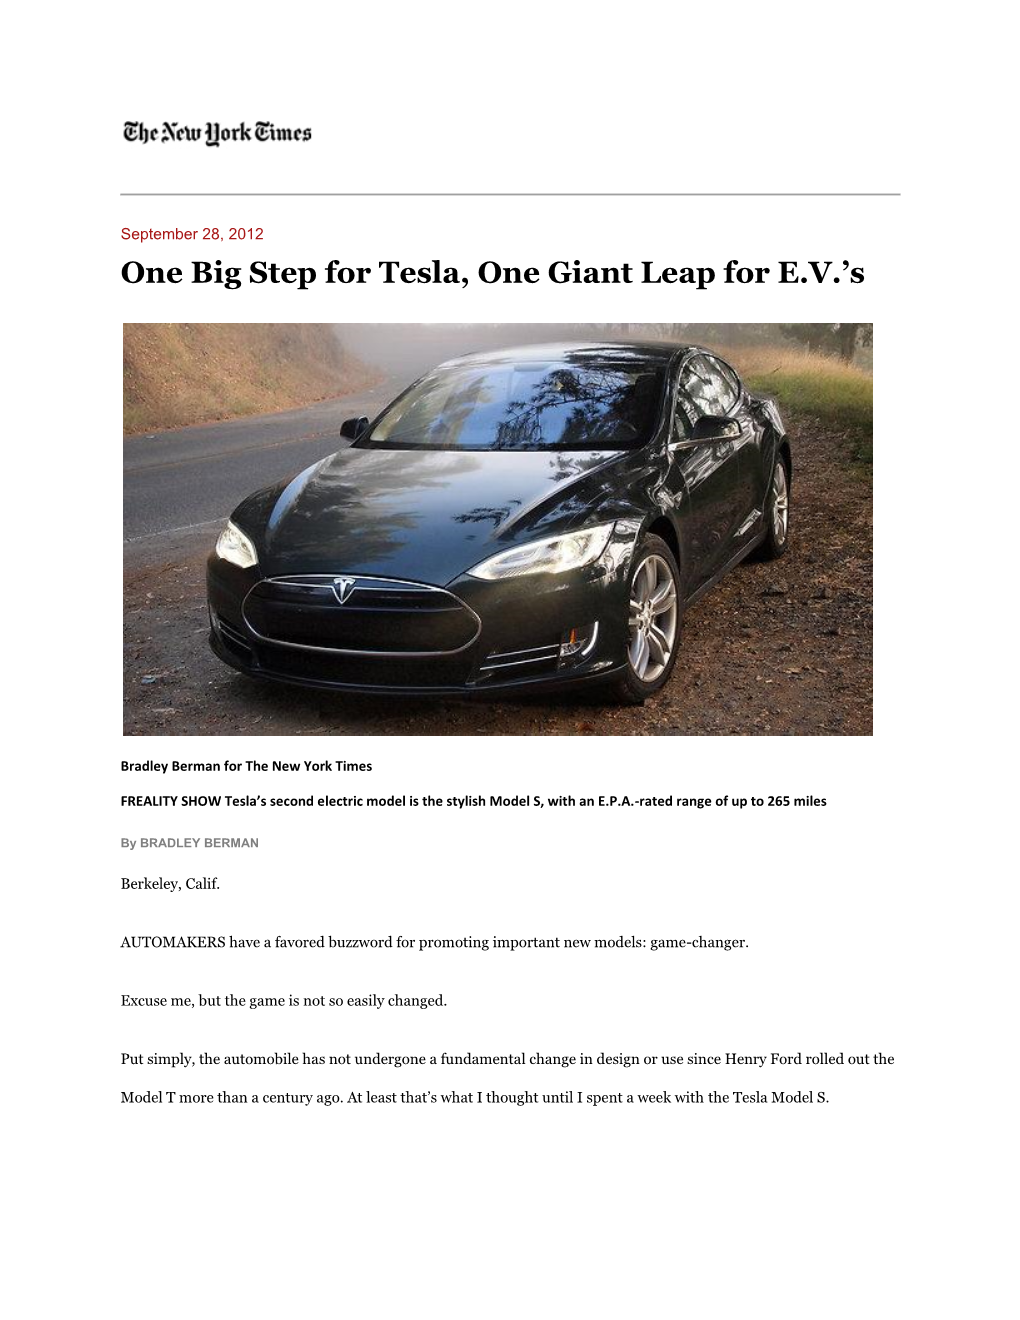 One Big Step for Tesla, One Giant Leap for EV's